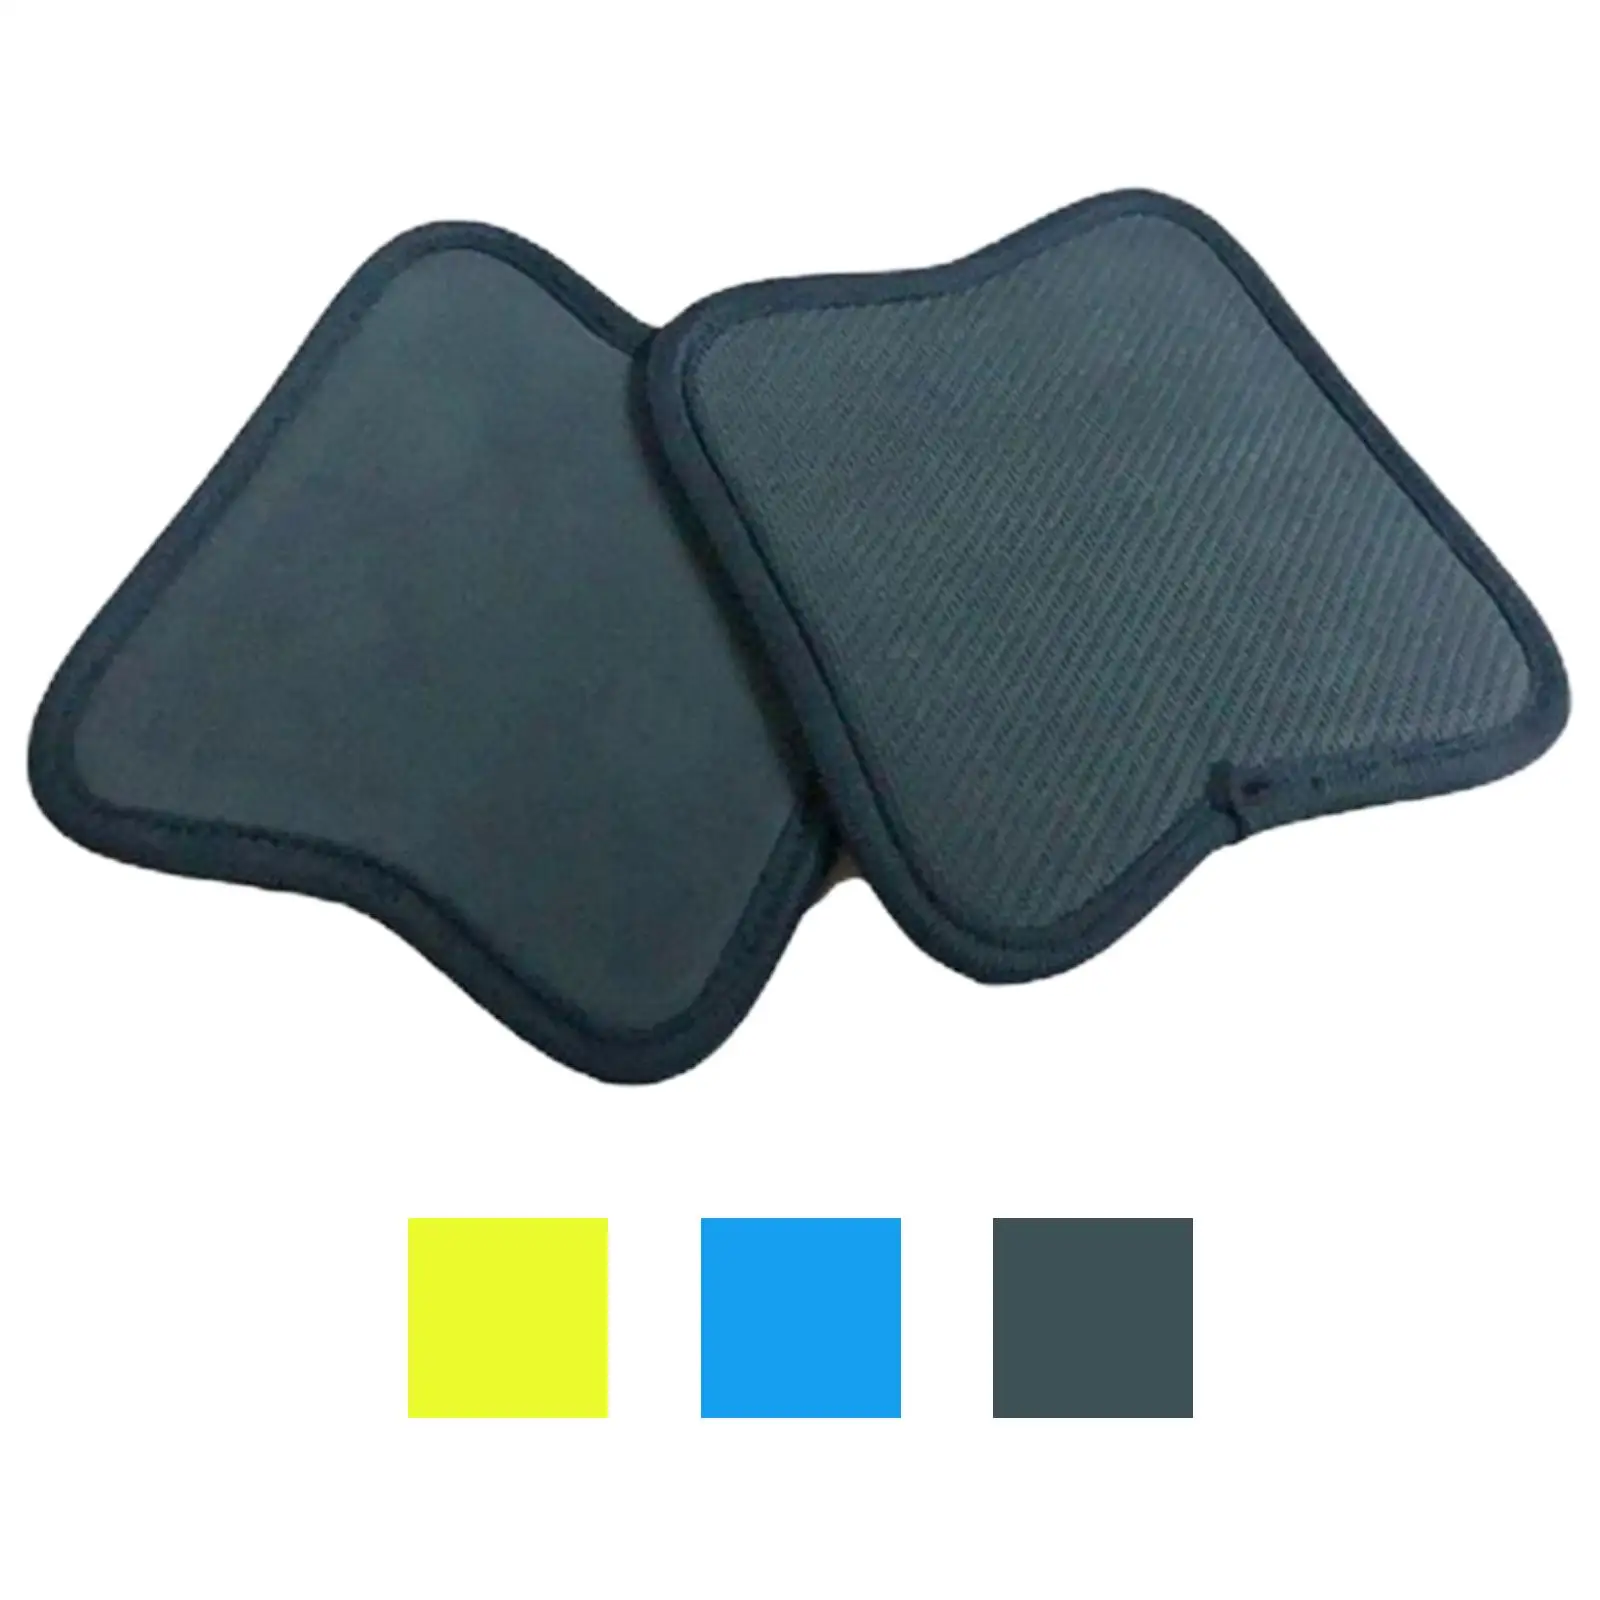 Fitness Lifting Neoprene Grips Gloves Weight Lifting Training Glove Workout Gym Palm Exercise Gloves  Grip Pads